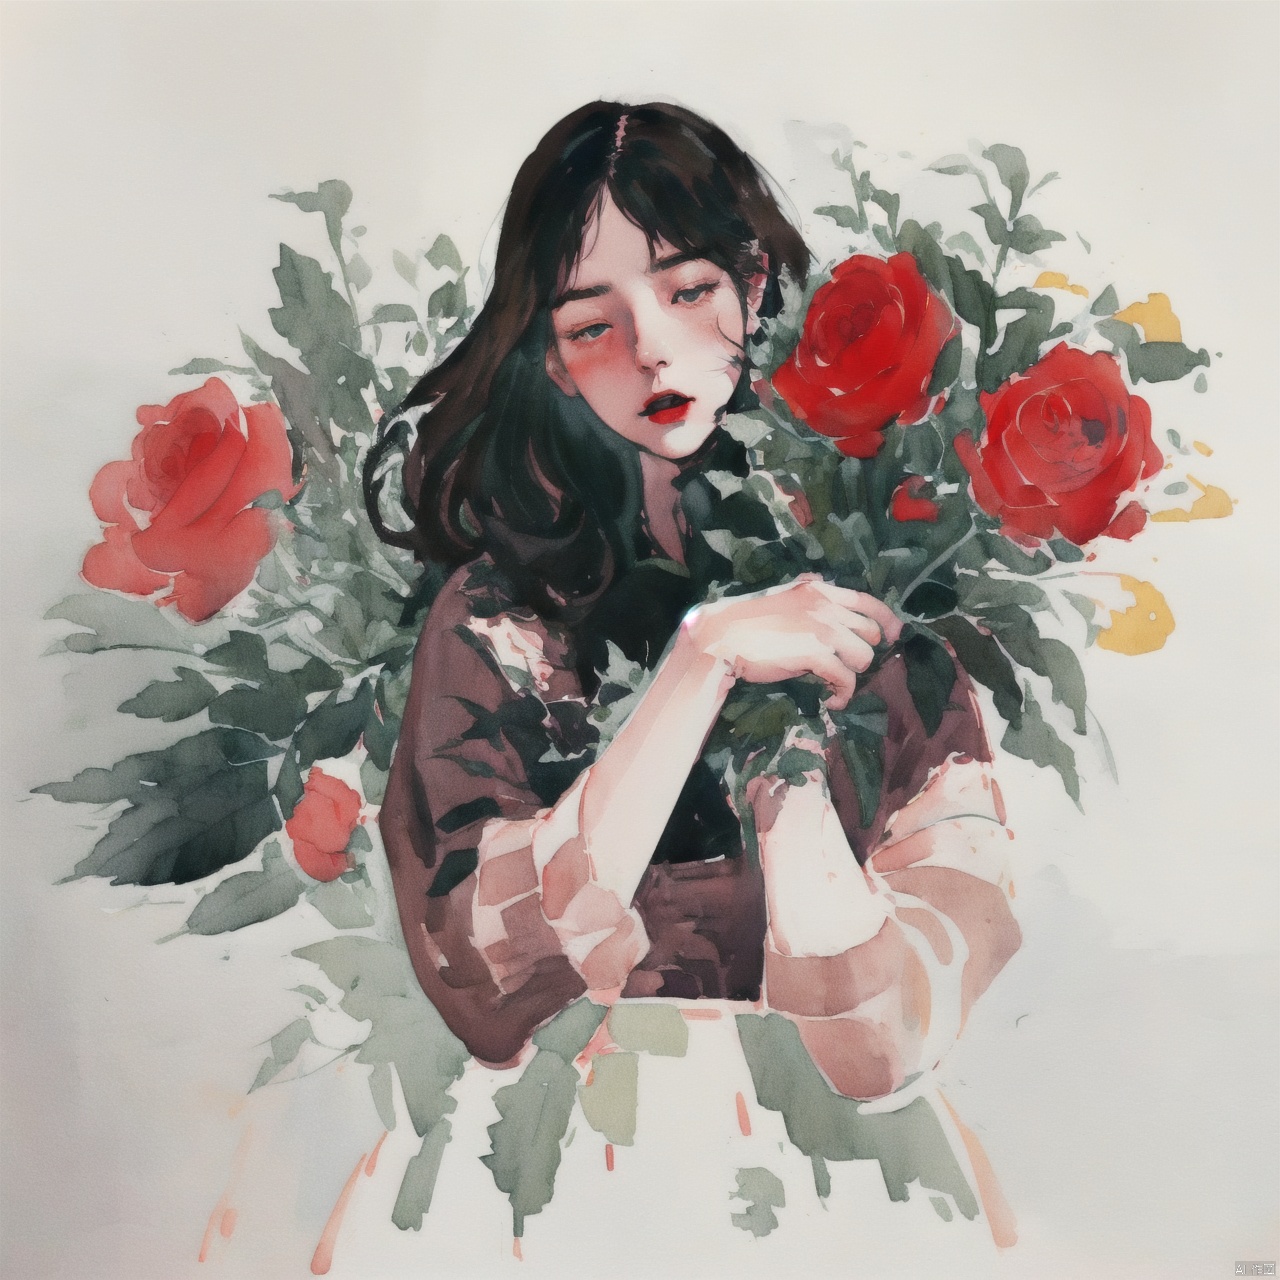  llustration style, The girl is wearing a red sweater and holding a large bouquet of roses in her hand, 8k, clear details, rich picture, blank background, flat color, vector illustration, watercolor, qzzd